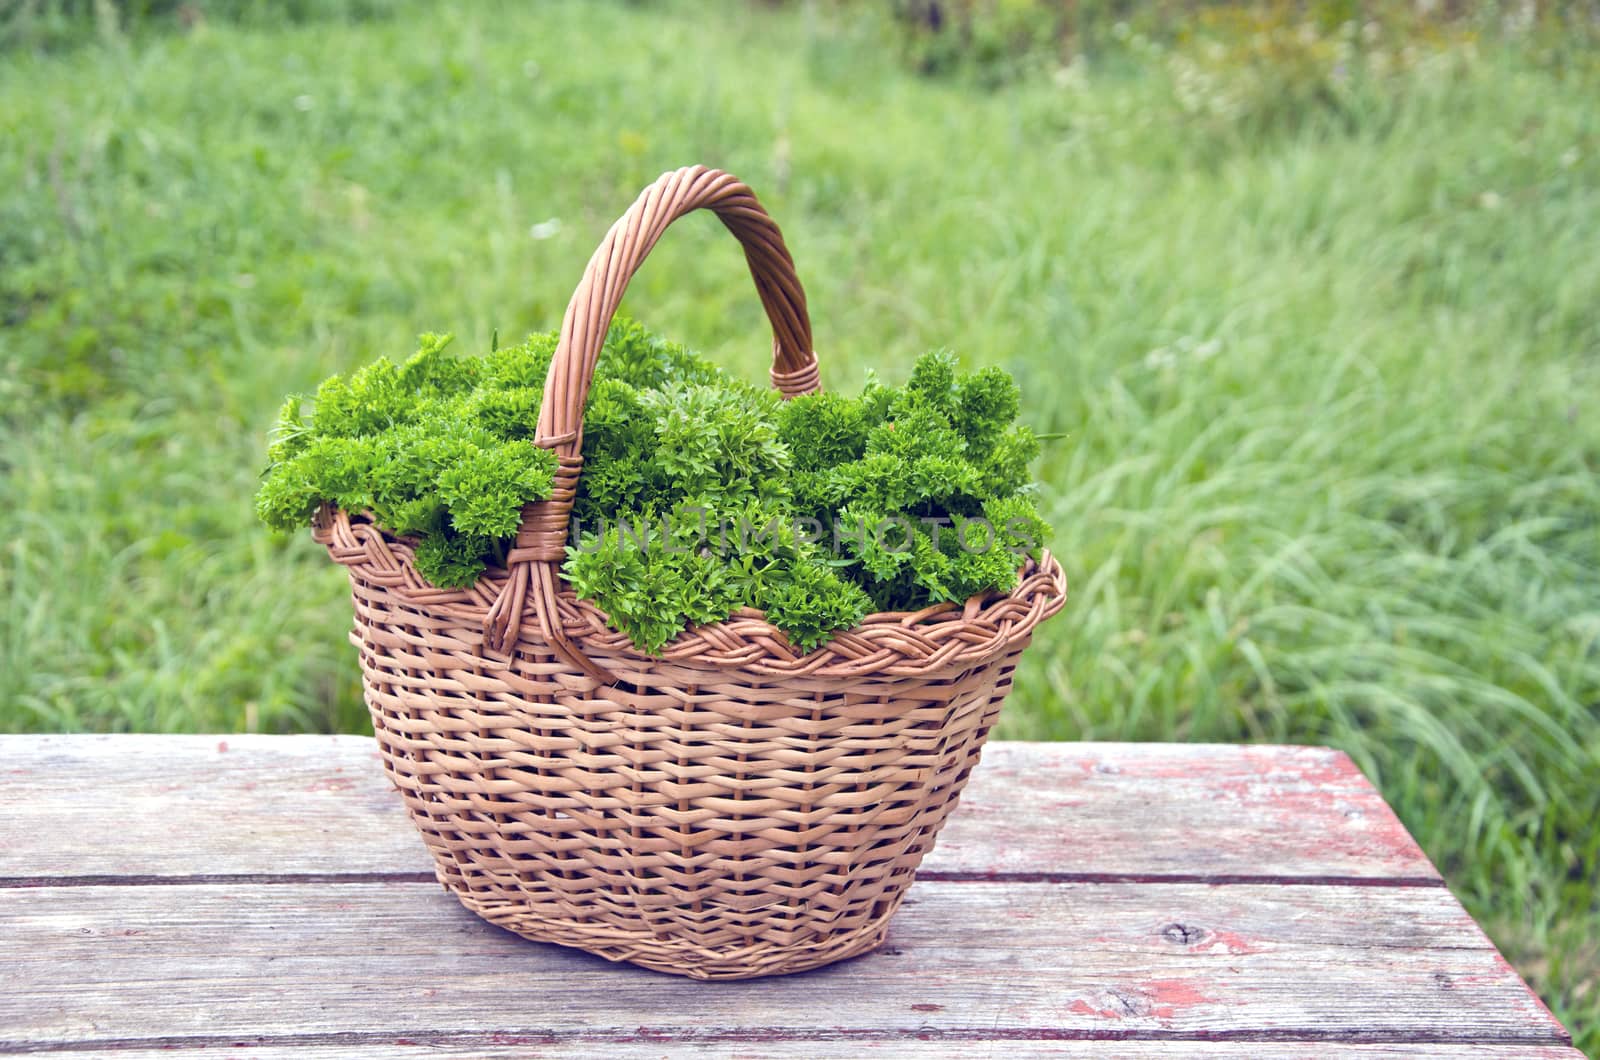 Fresh parsley in wicker basket placed on wooden table